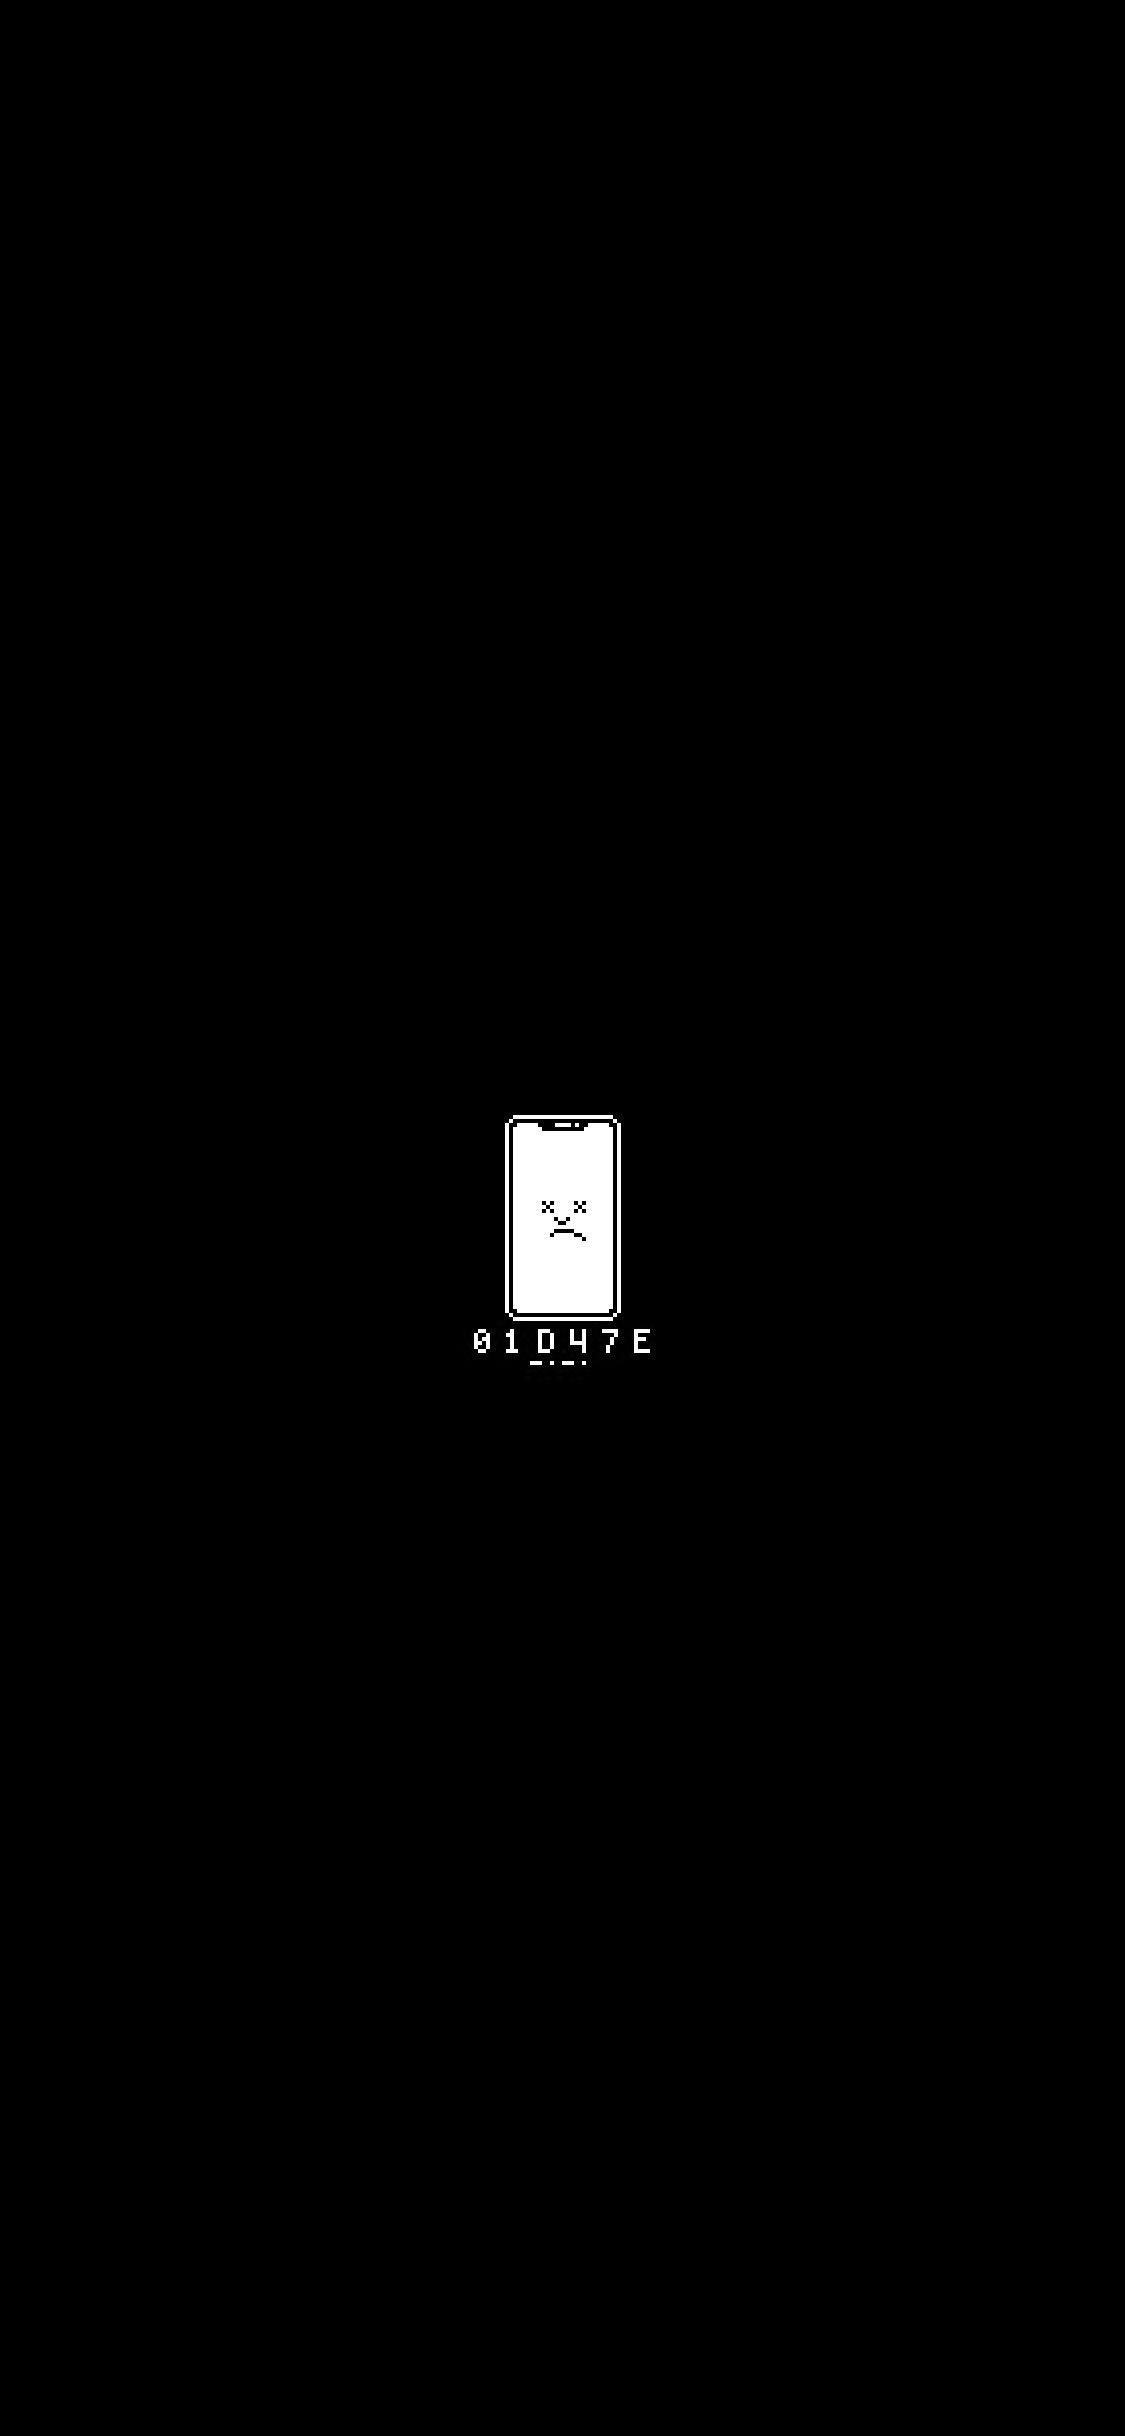 I made an iPhone X style Sad Mac wallpapers : iphone